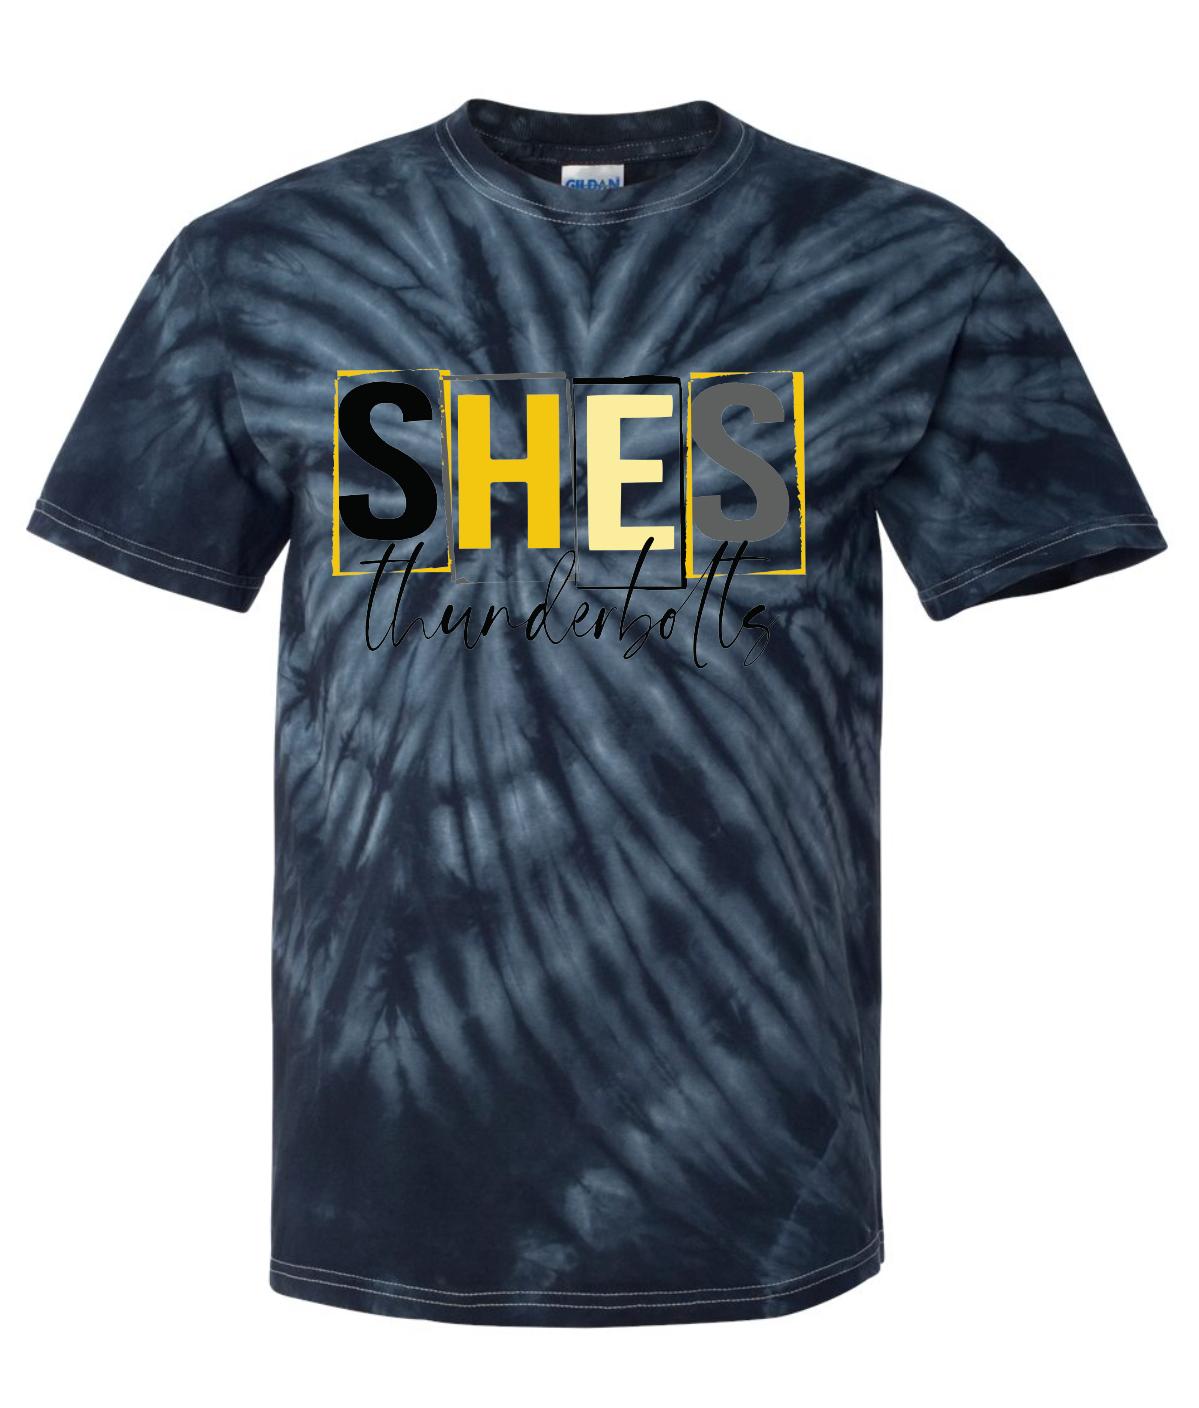 SHES Mascot Tie-Dyed T-Shirt